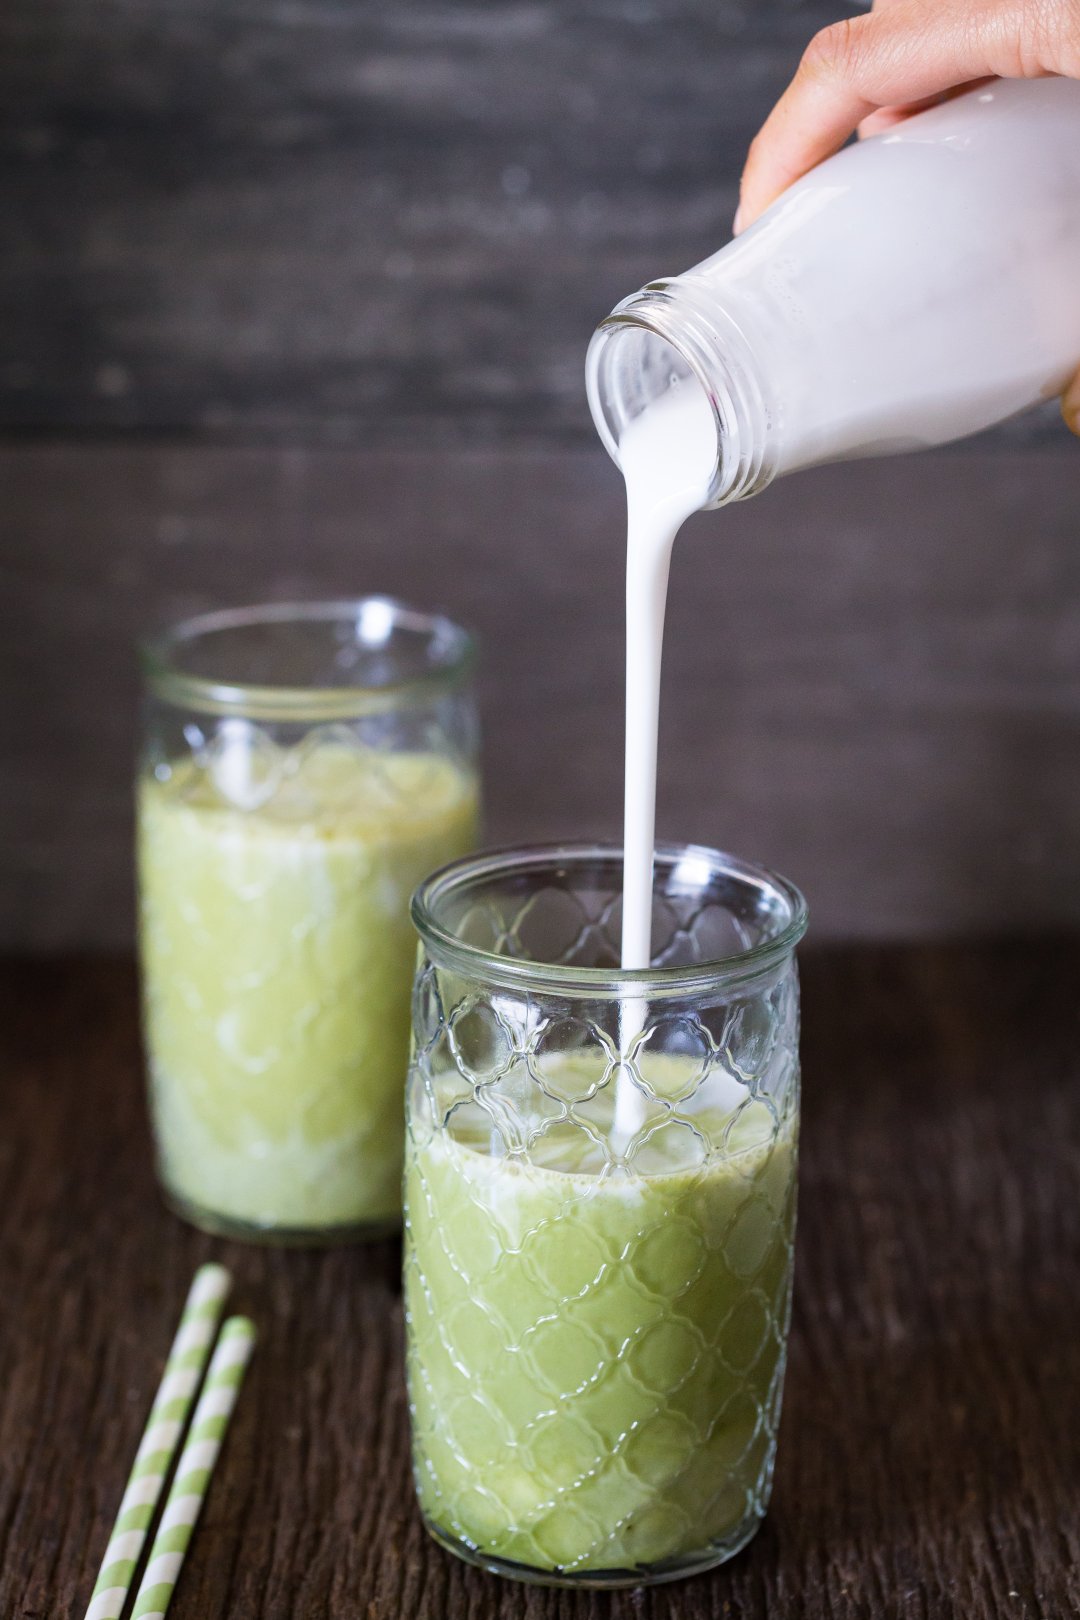 Matcha Green Tea Latte Recipe {Vegan} - The Nutty Scoop from Nuts.com